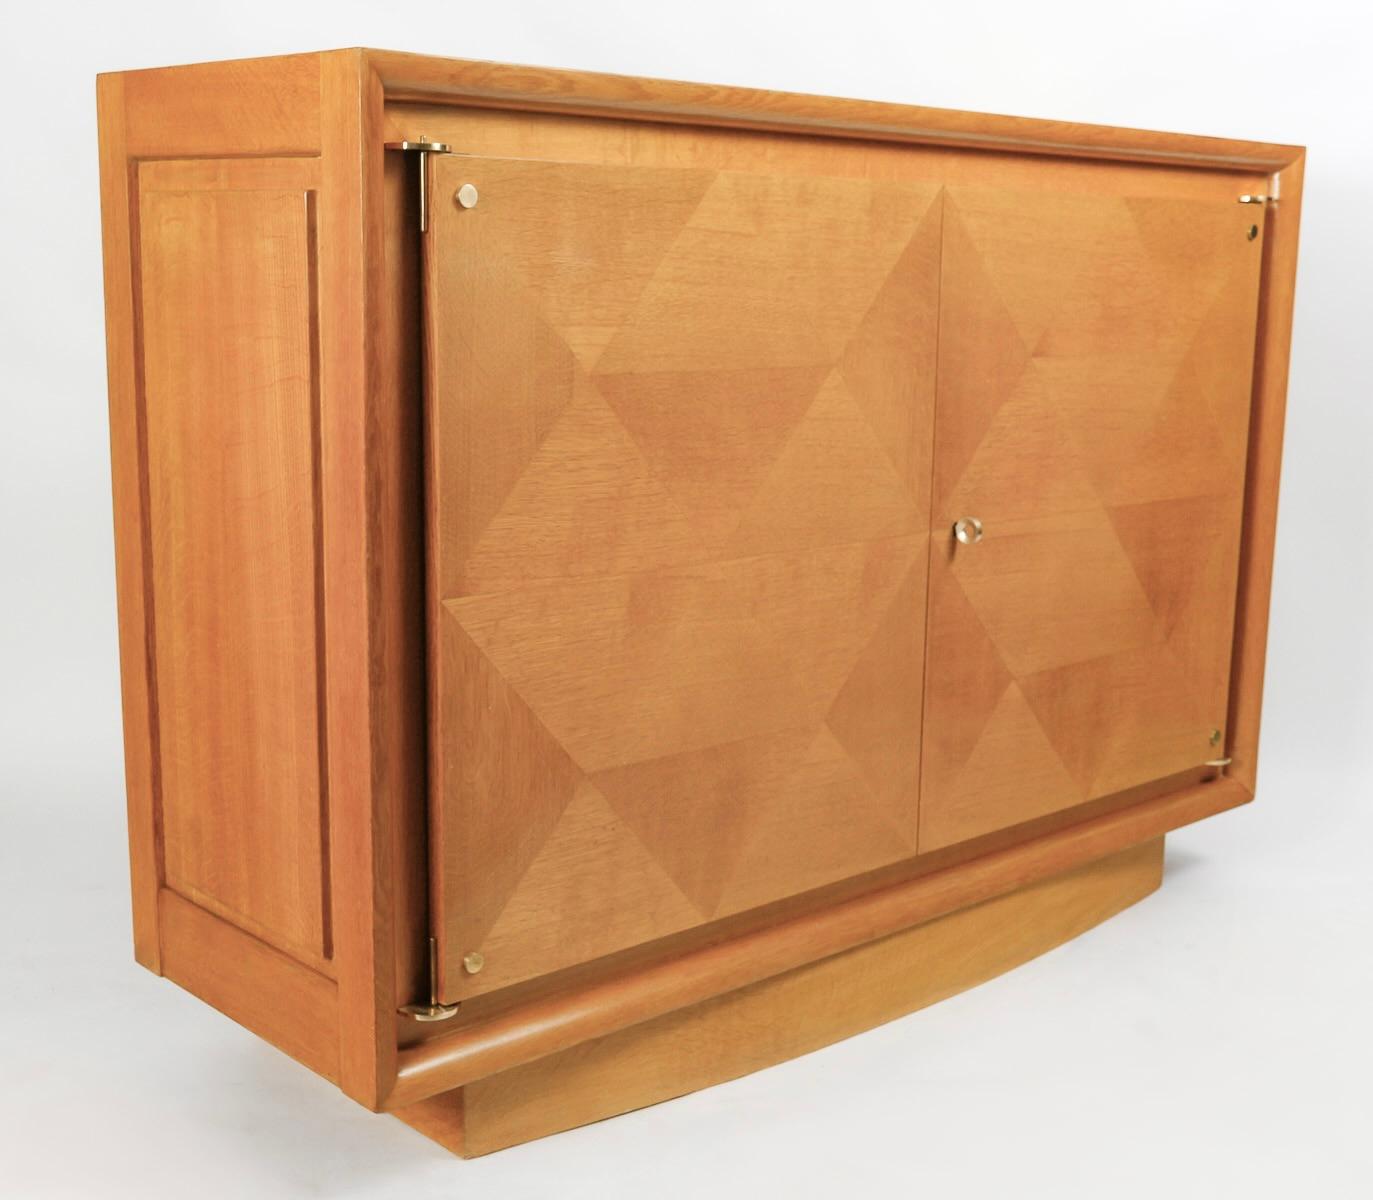 Bronze 1940 Storage unit by Maxime Old in light oak marquetry.